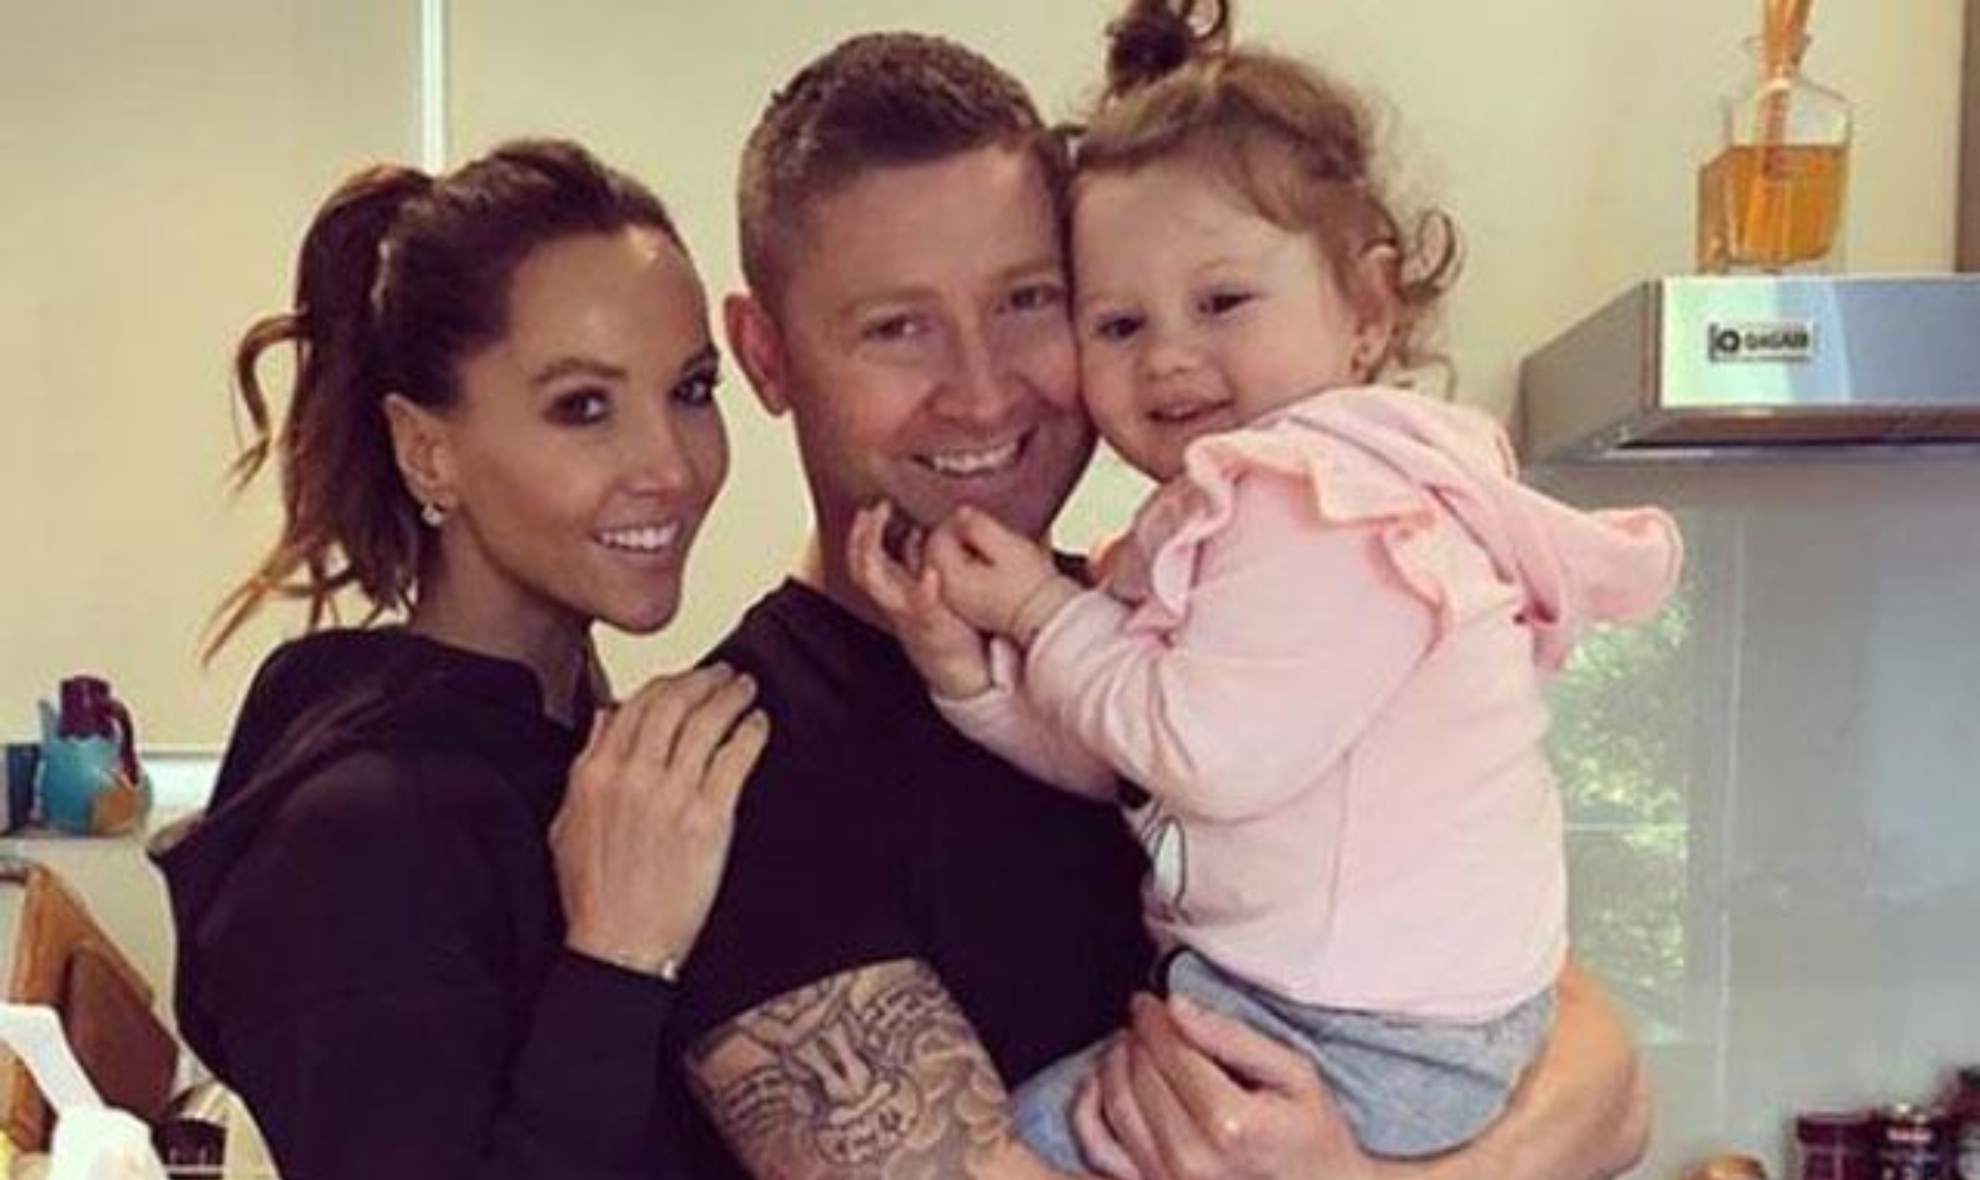 Michael & Kyly Clarke spark baby rumours after the exes were spotted having a family holiday together